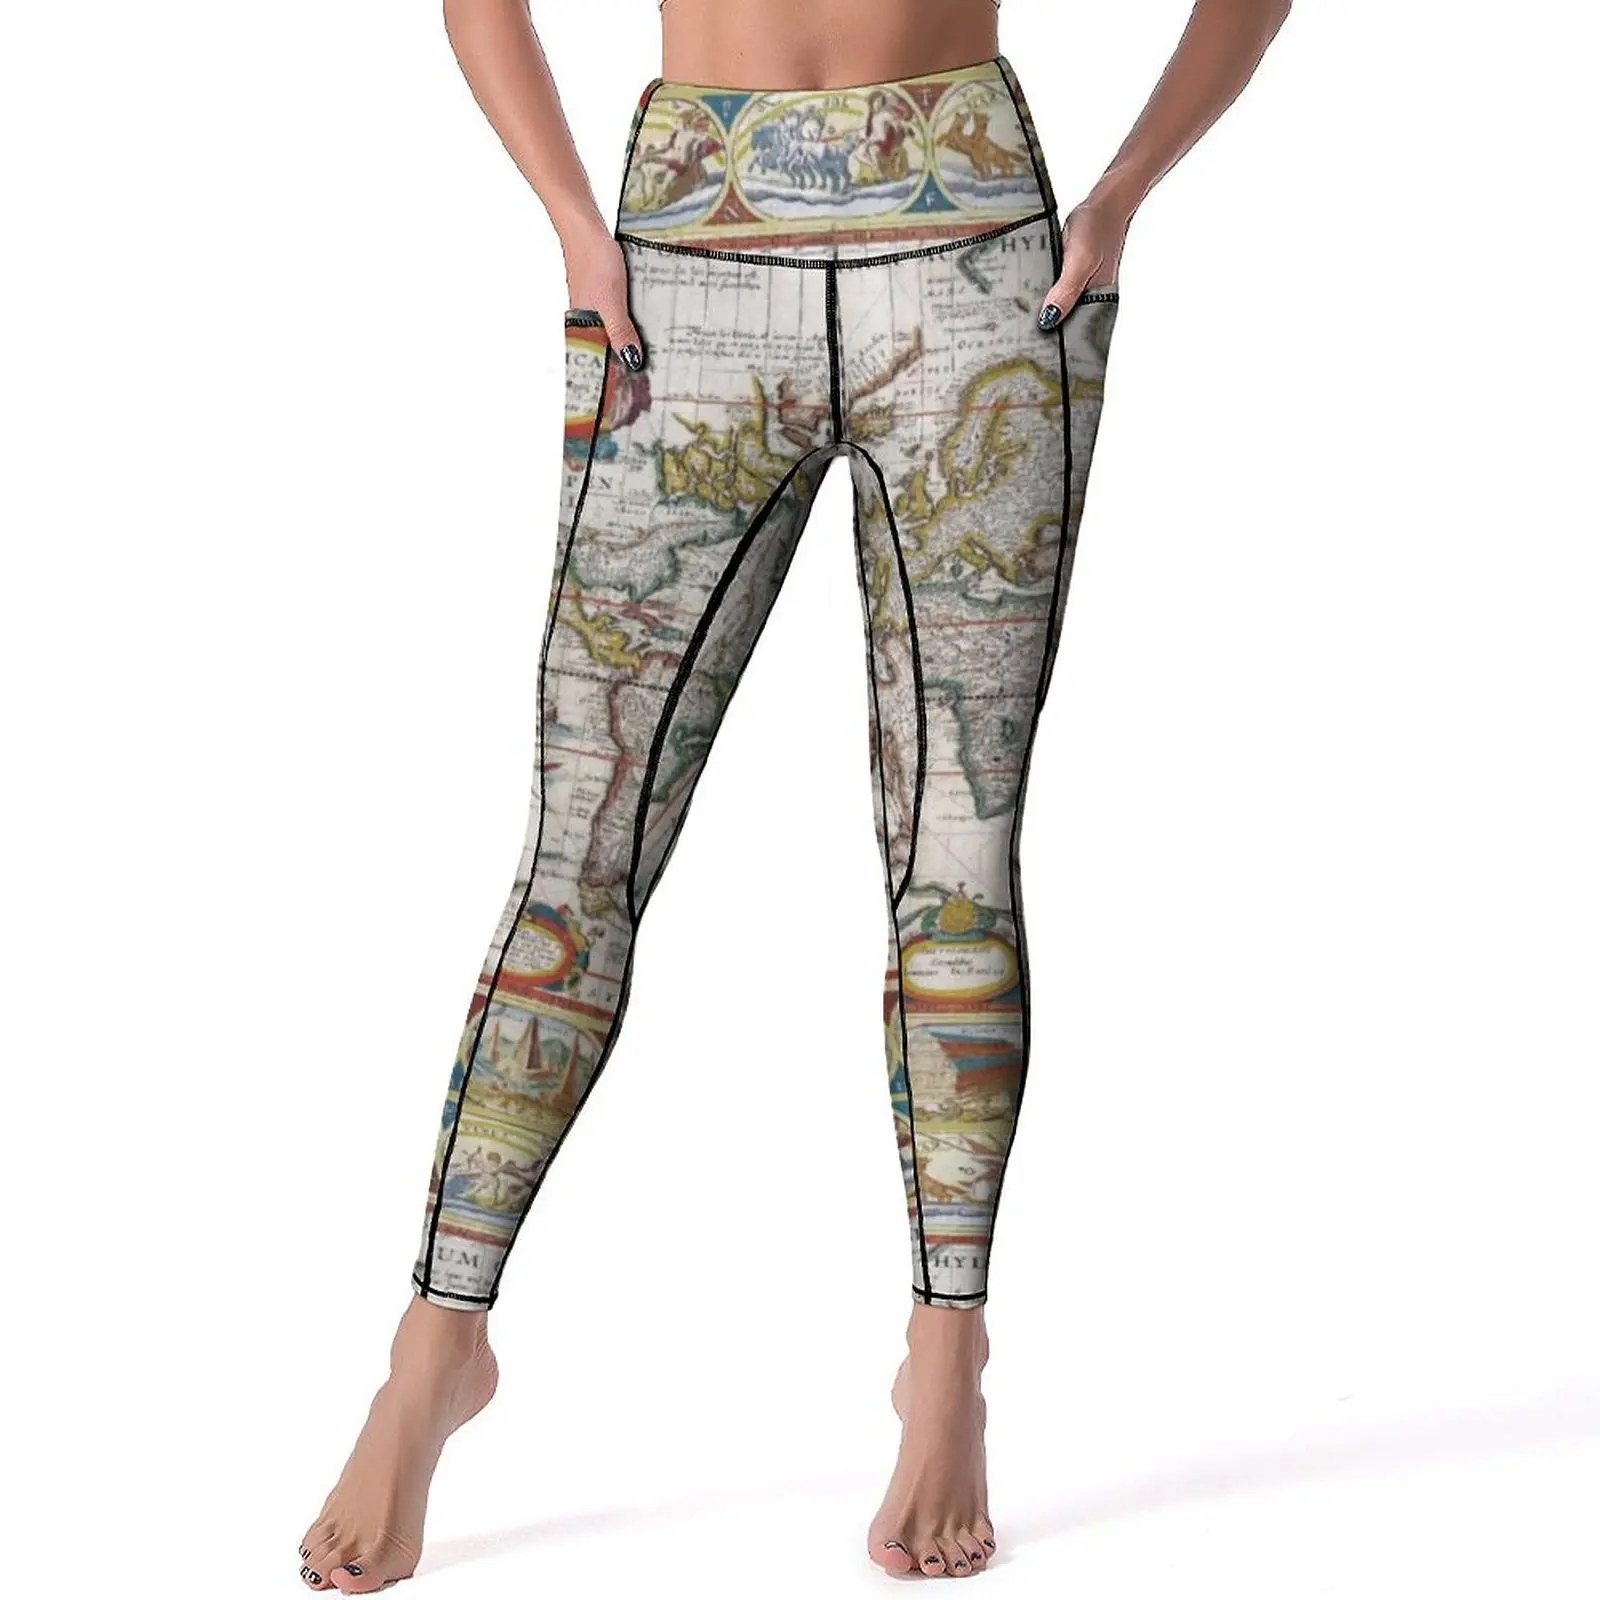 

Earth Map Yoga Pants Sexy Antique World Map Pattern Leggings Push Up Work Out Leggins Lady Vintage Elastic Sports Tights